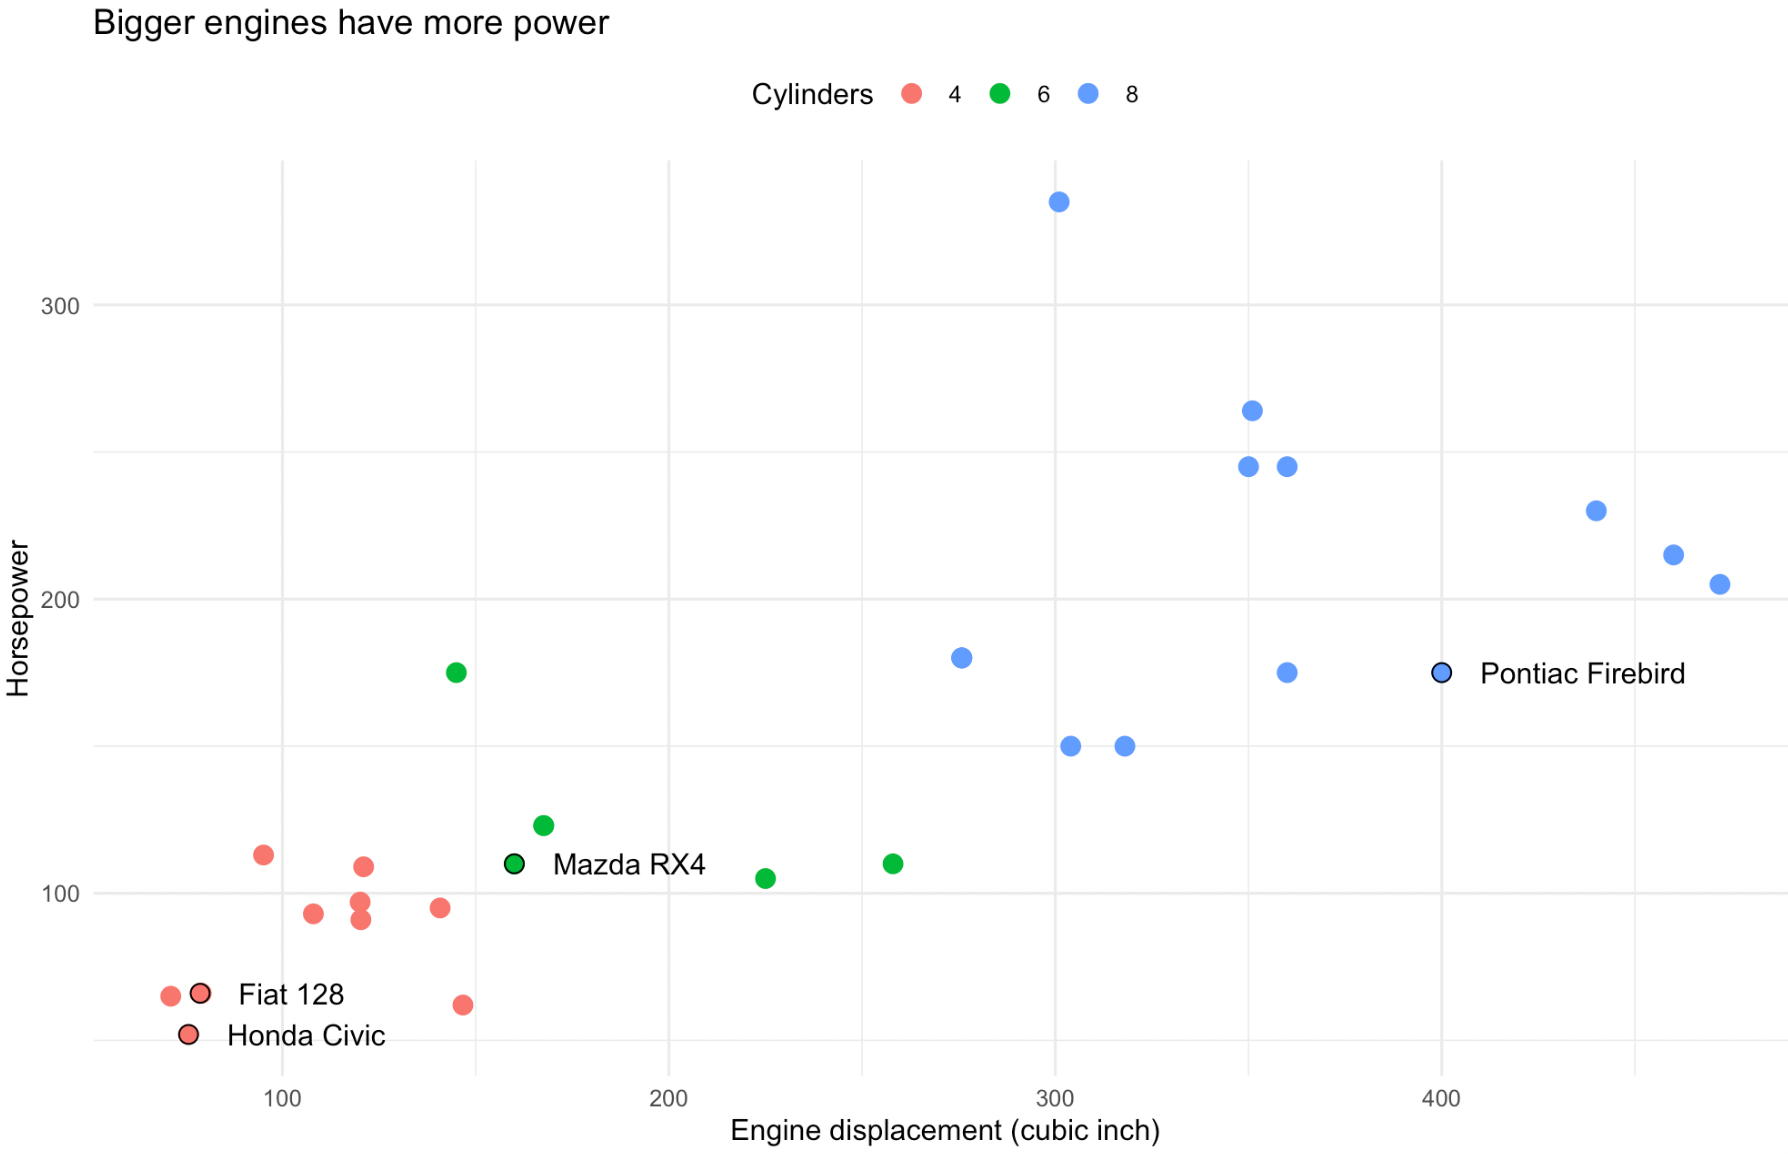 A scatterplot generated from the dataset about cars, with horsepower on the y axis and engine displacement on the x axis. The colours of the dots represent the number of cylinders. The Honda Civic, the Fiat 128, the Mazda RX4 and the Pontiac Firebird are labelled on the chart